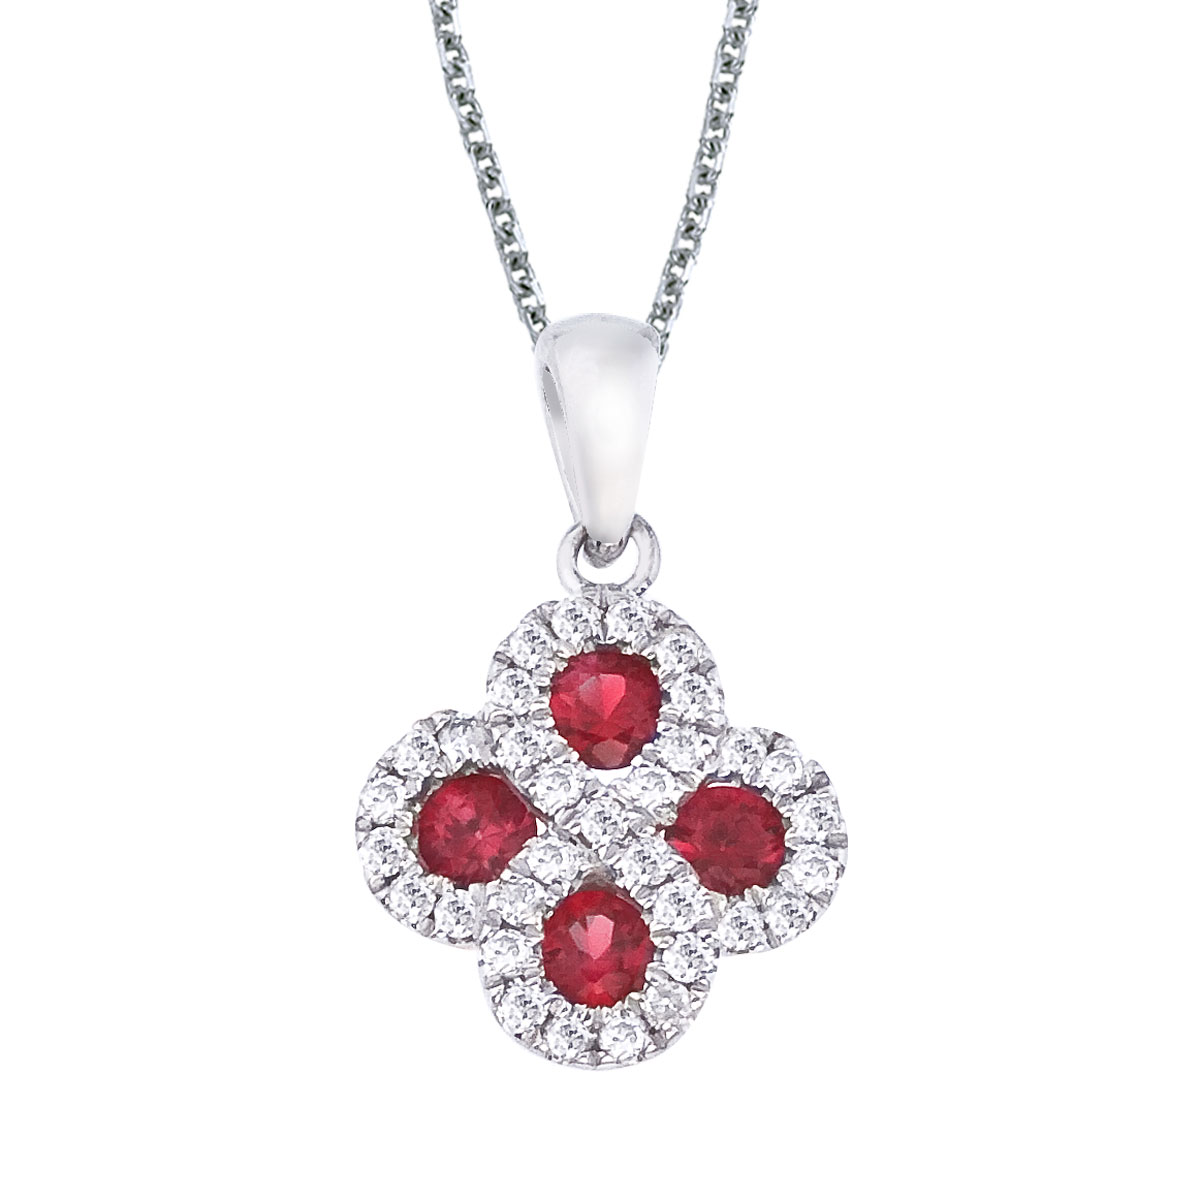 JCX2564: This 14k white gold clover shape pendant contains four 2.7 mm rubies surrounded by .13 carats of shimmering diamonds.